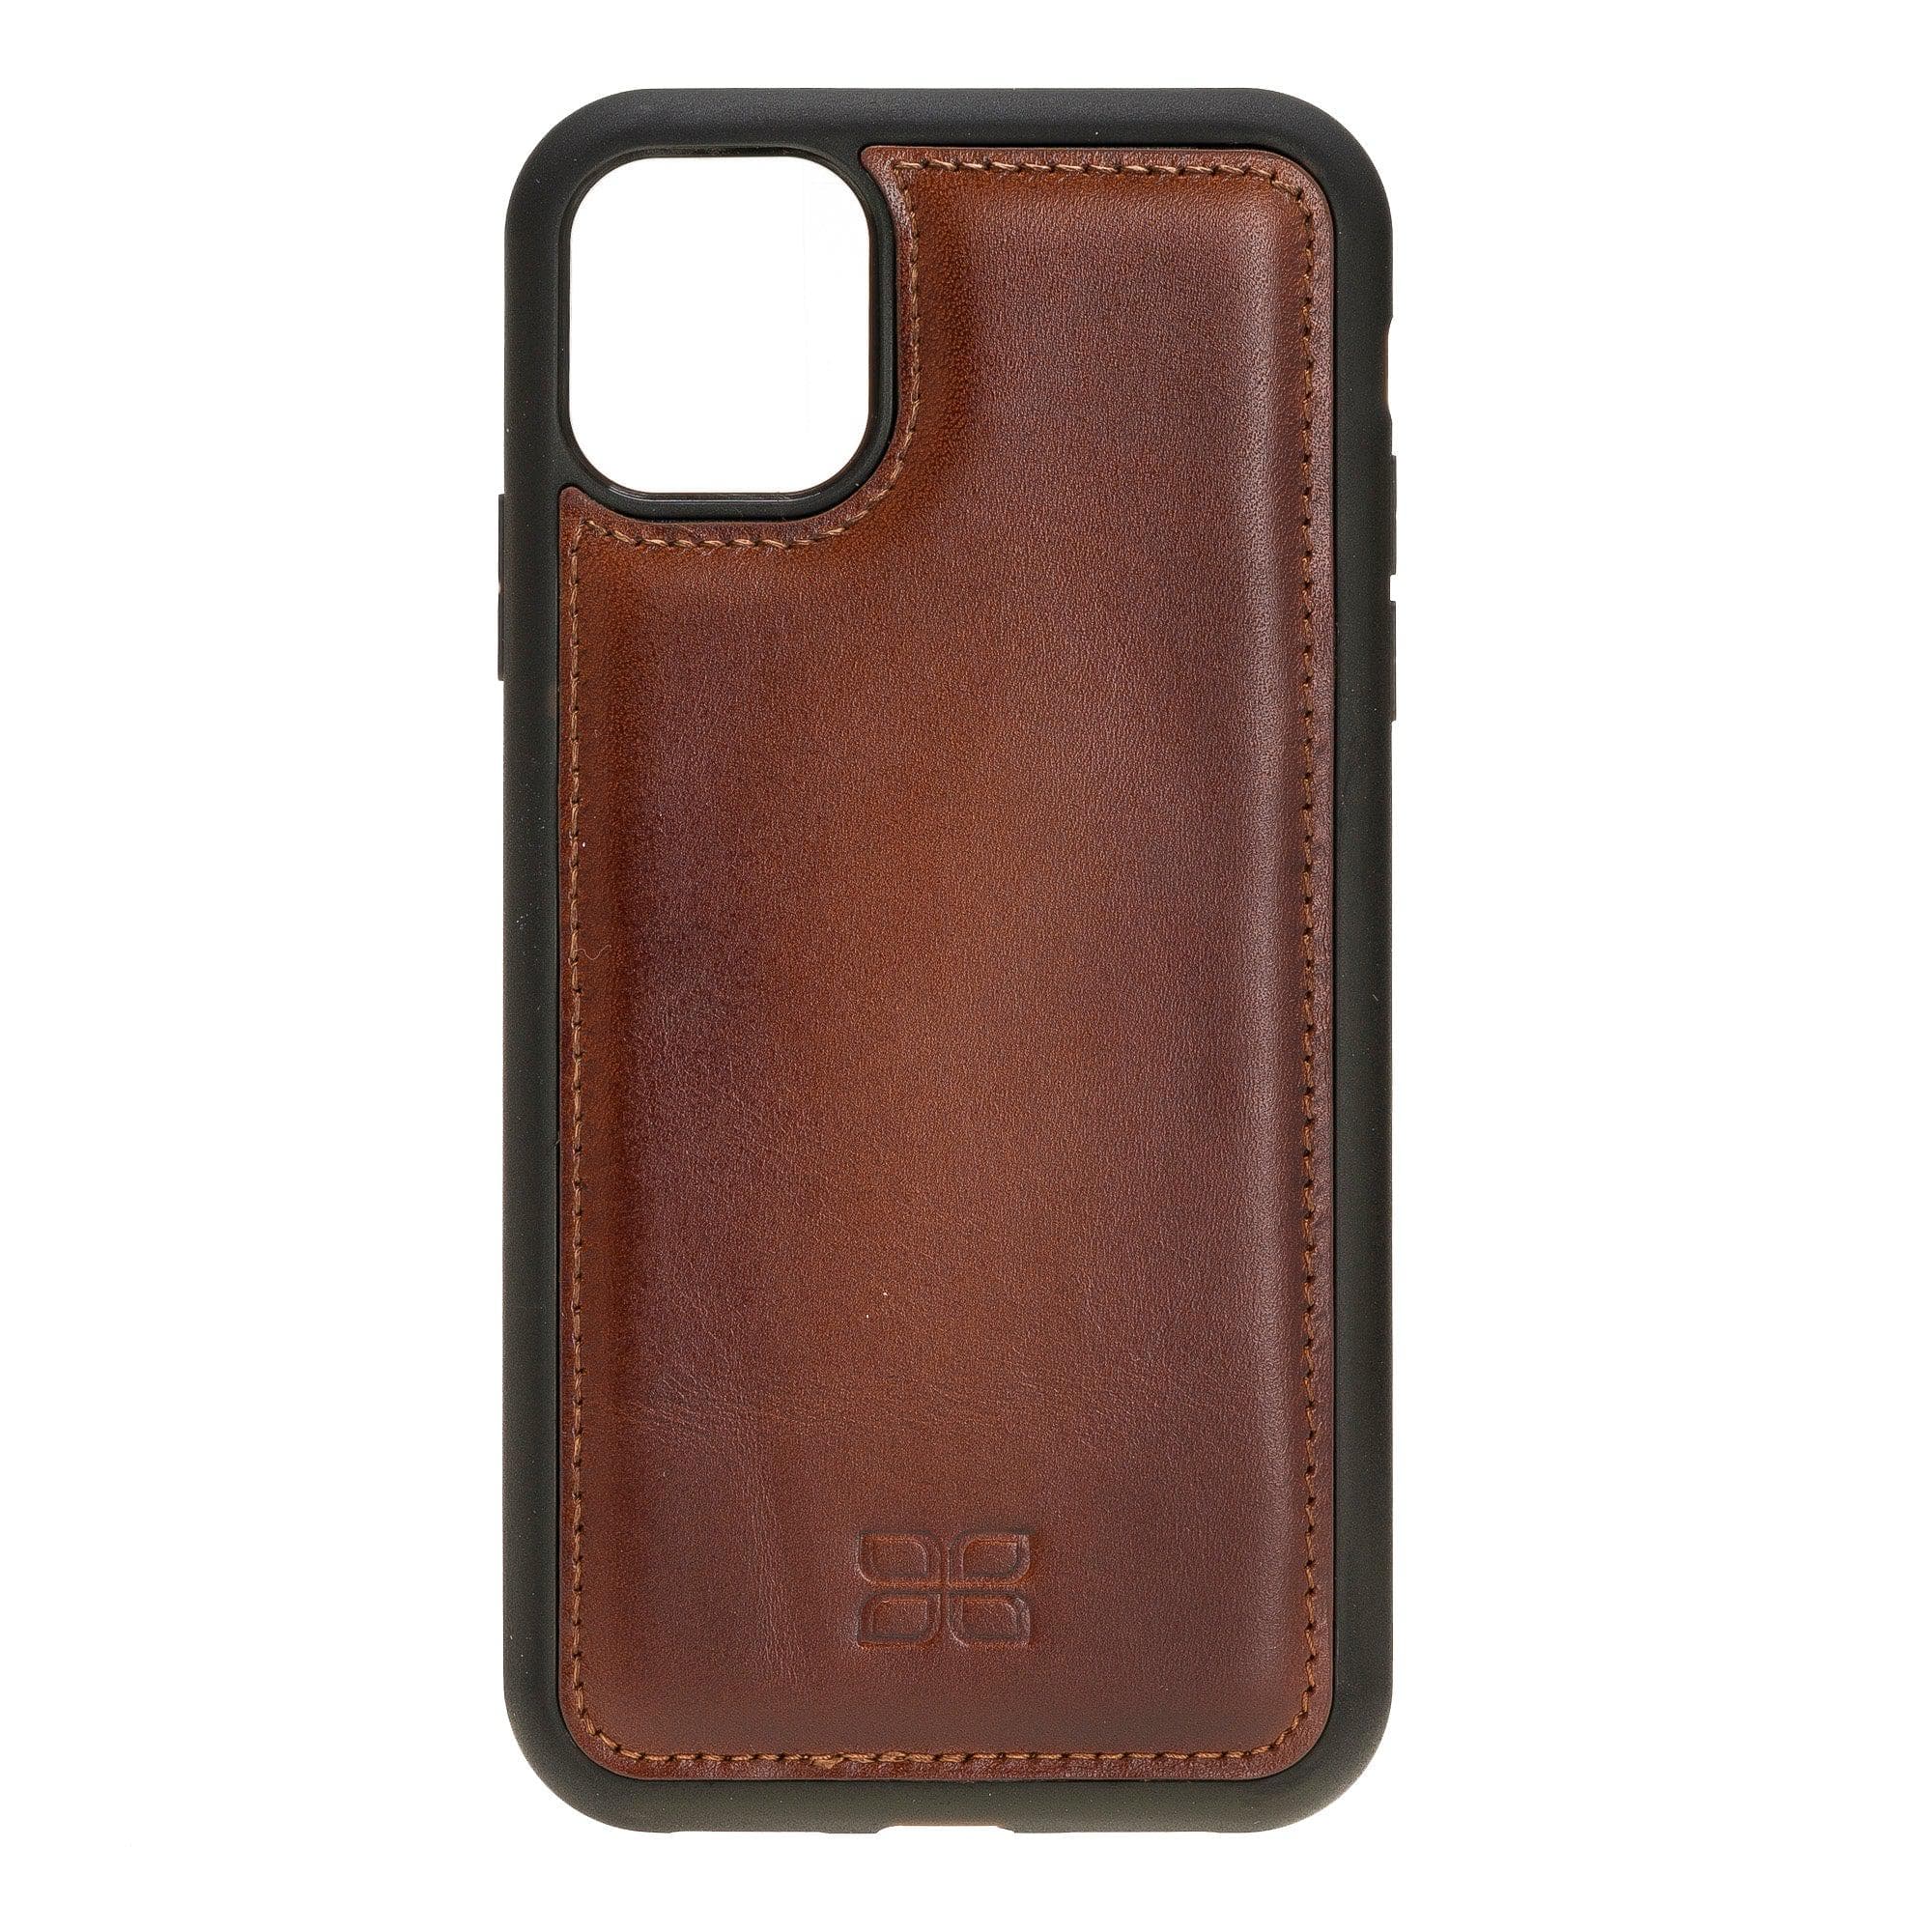 Flex Cover Leather Back Cover Case for Apple iPhone 11 Series iPhone 11 6.1" / Tan Bouletta LTD